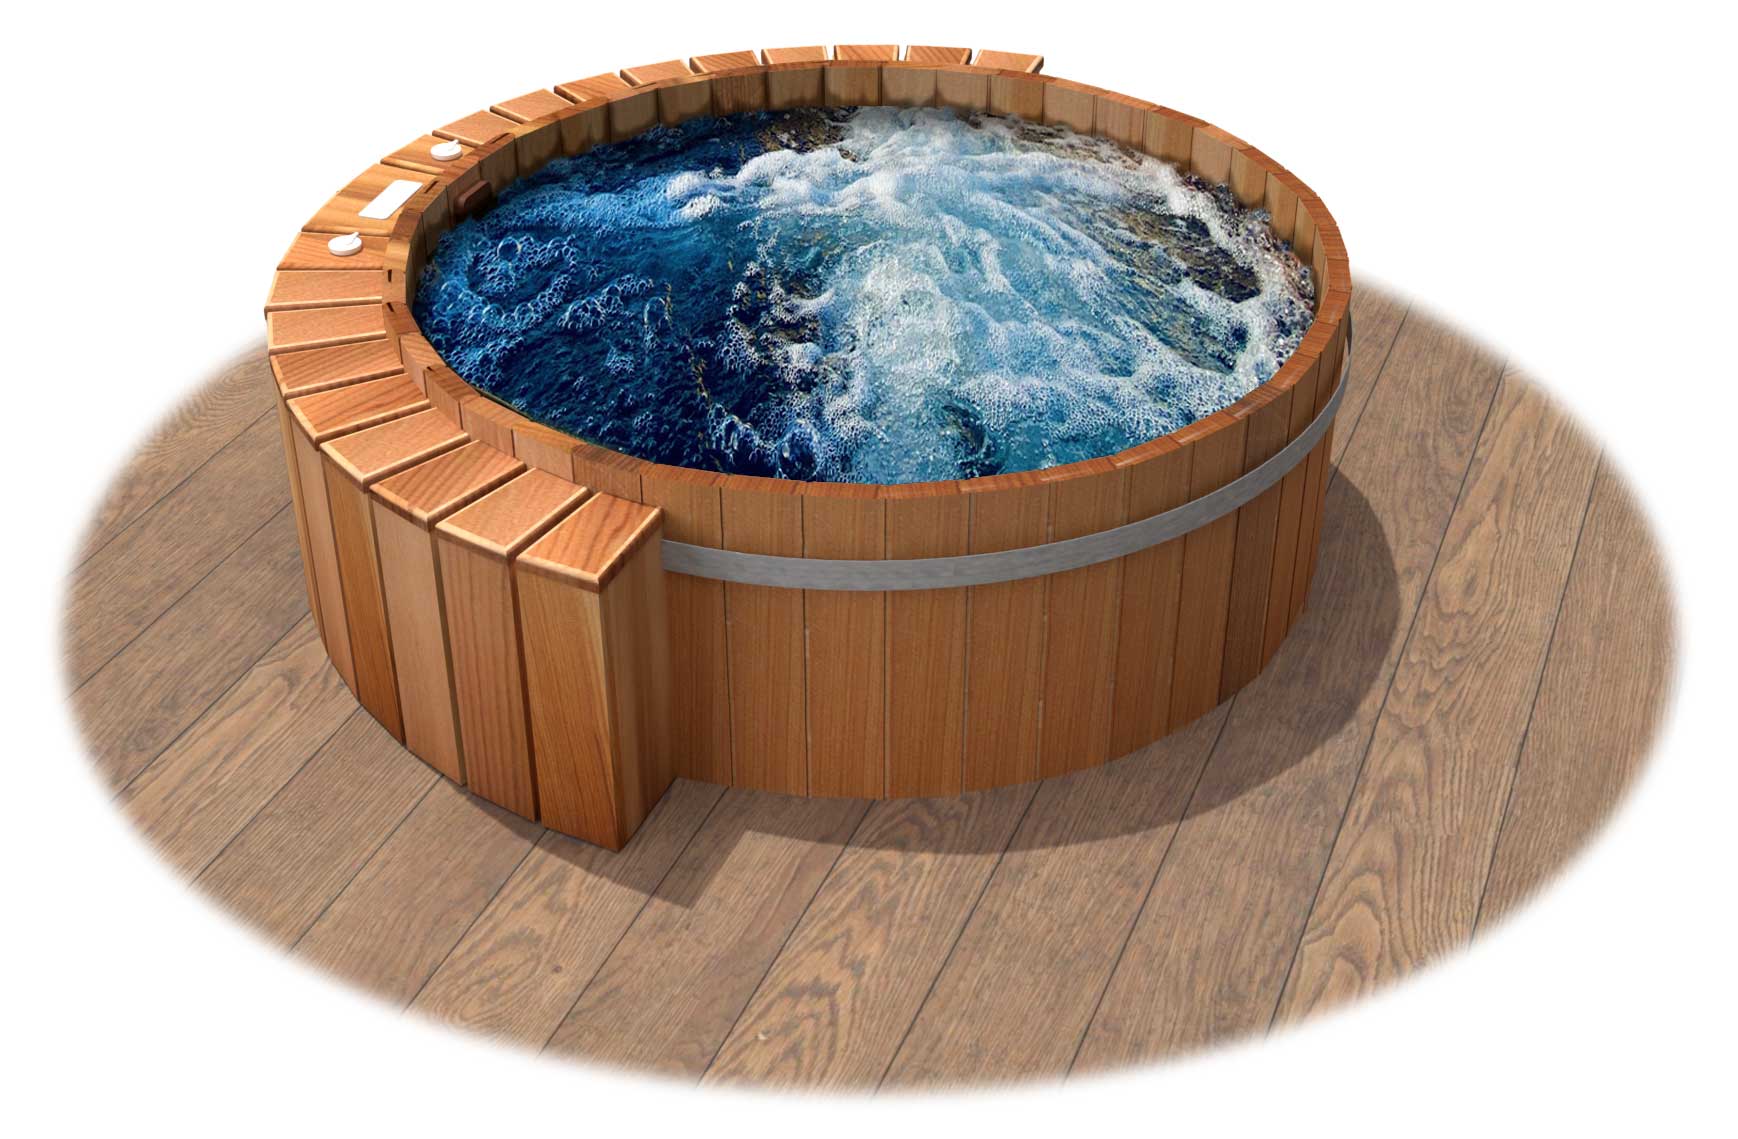 Cedar Wood Hot Tub semi-recessed with jets on